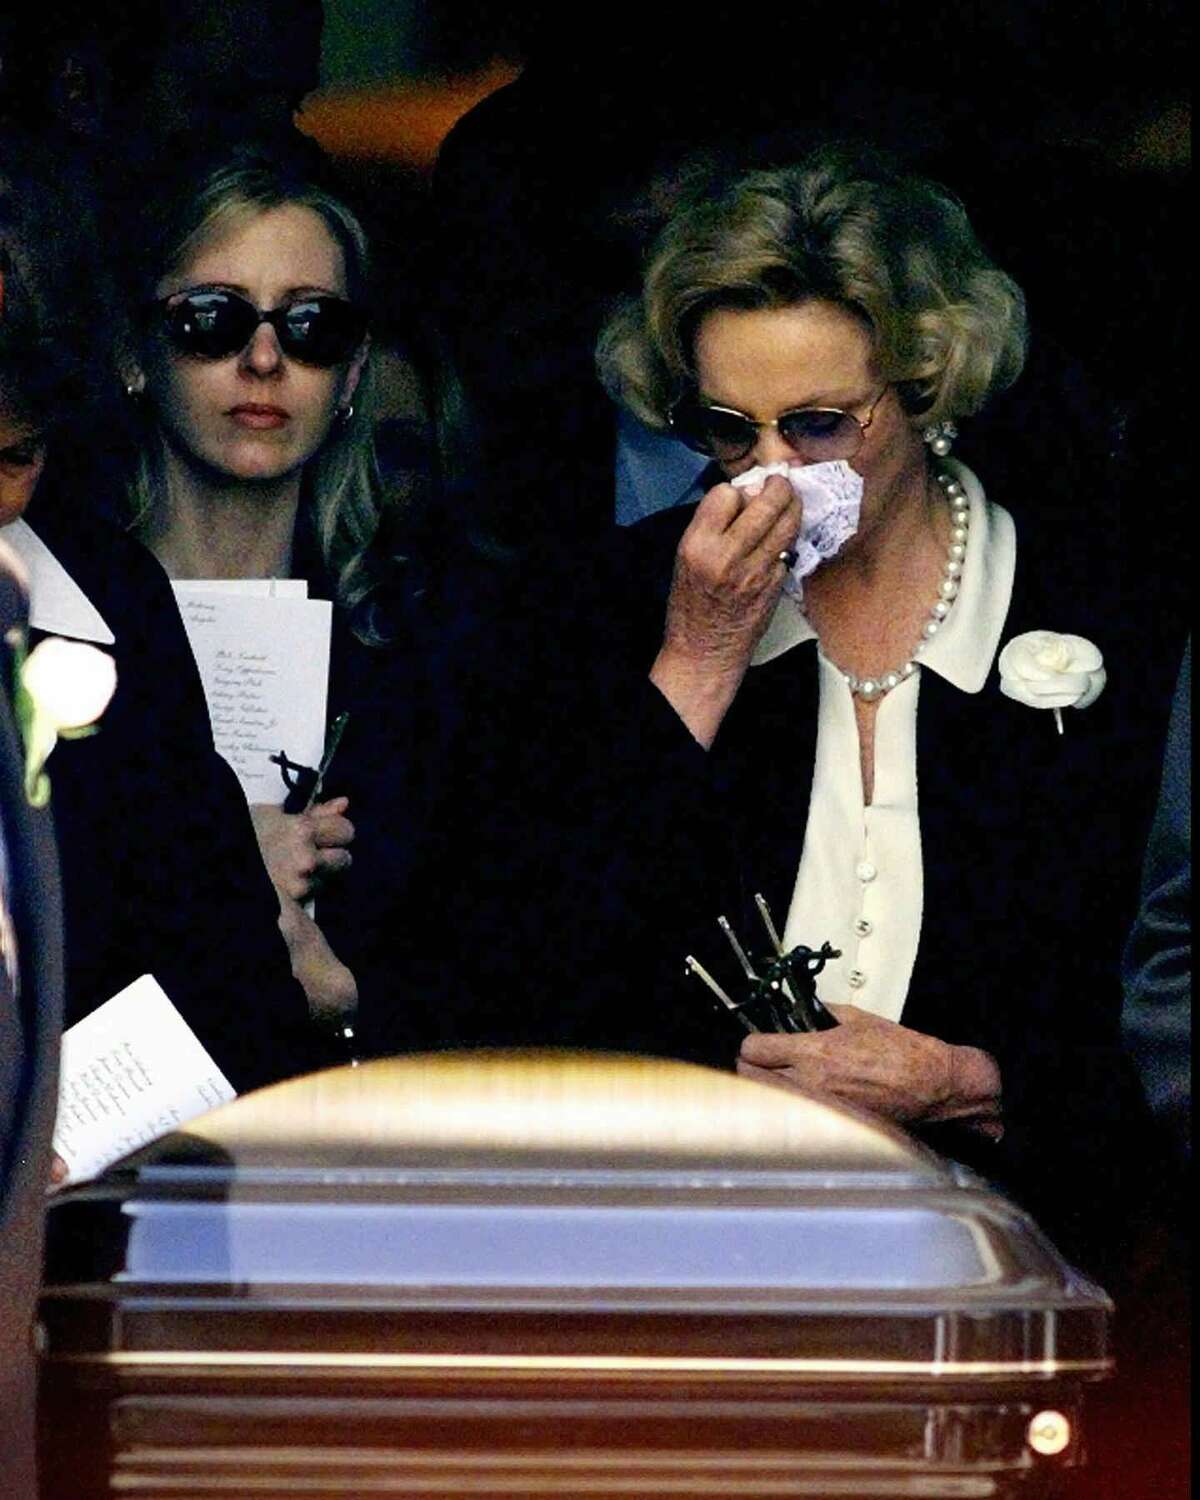 Barbara Sinatra, right, wife of the late entertainer Frank Sinatra follows his the coffin after a funeral service at the Church of the Good Shepherd in Beverly Hills, Calif., Wednesday, May 20, 1998.